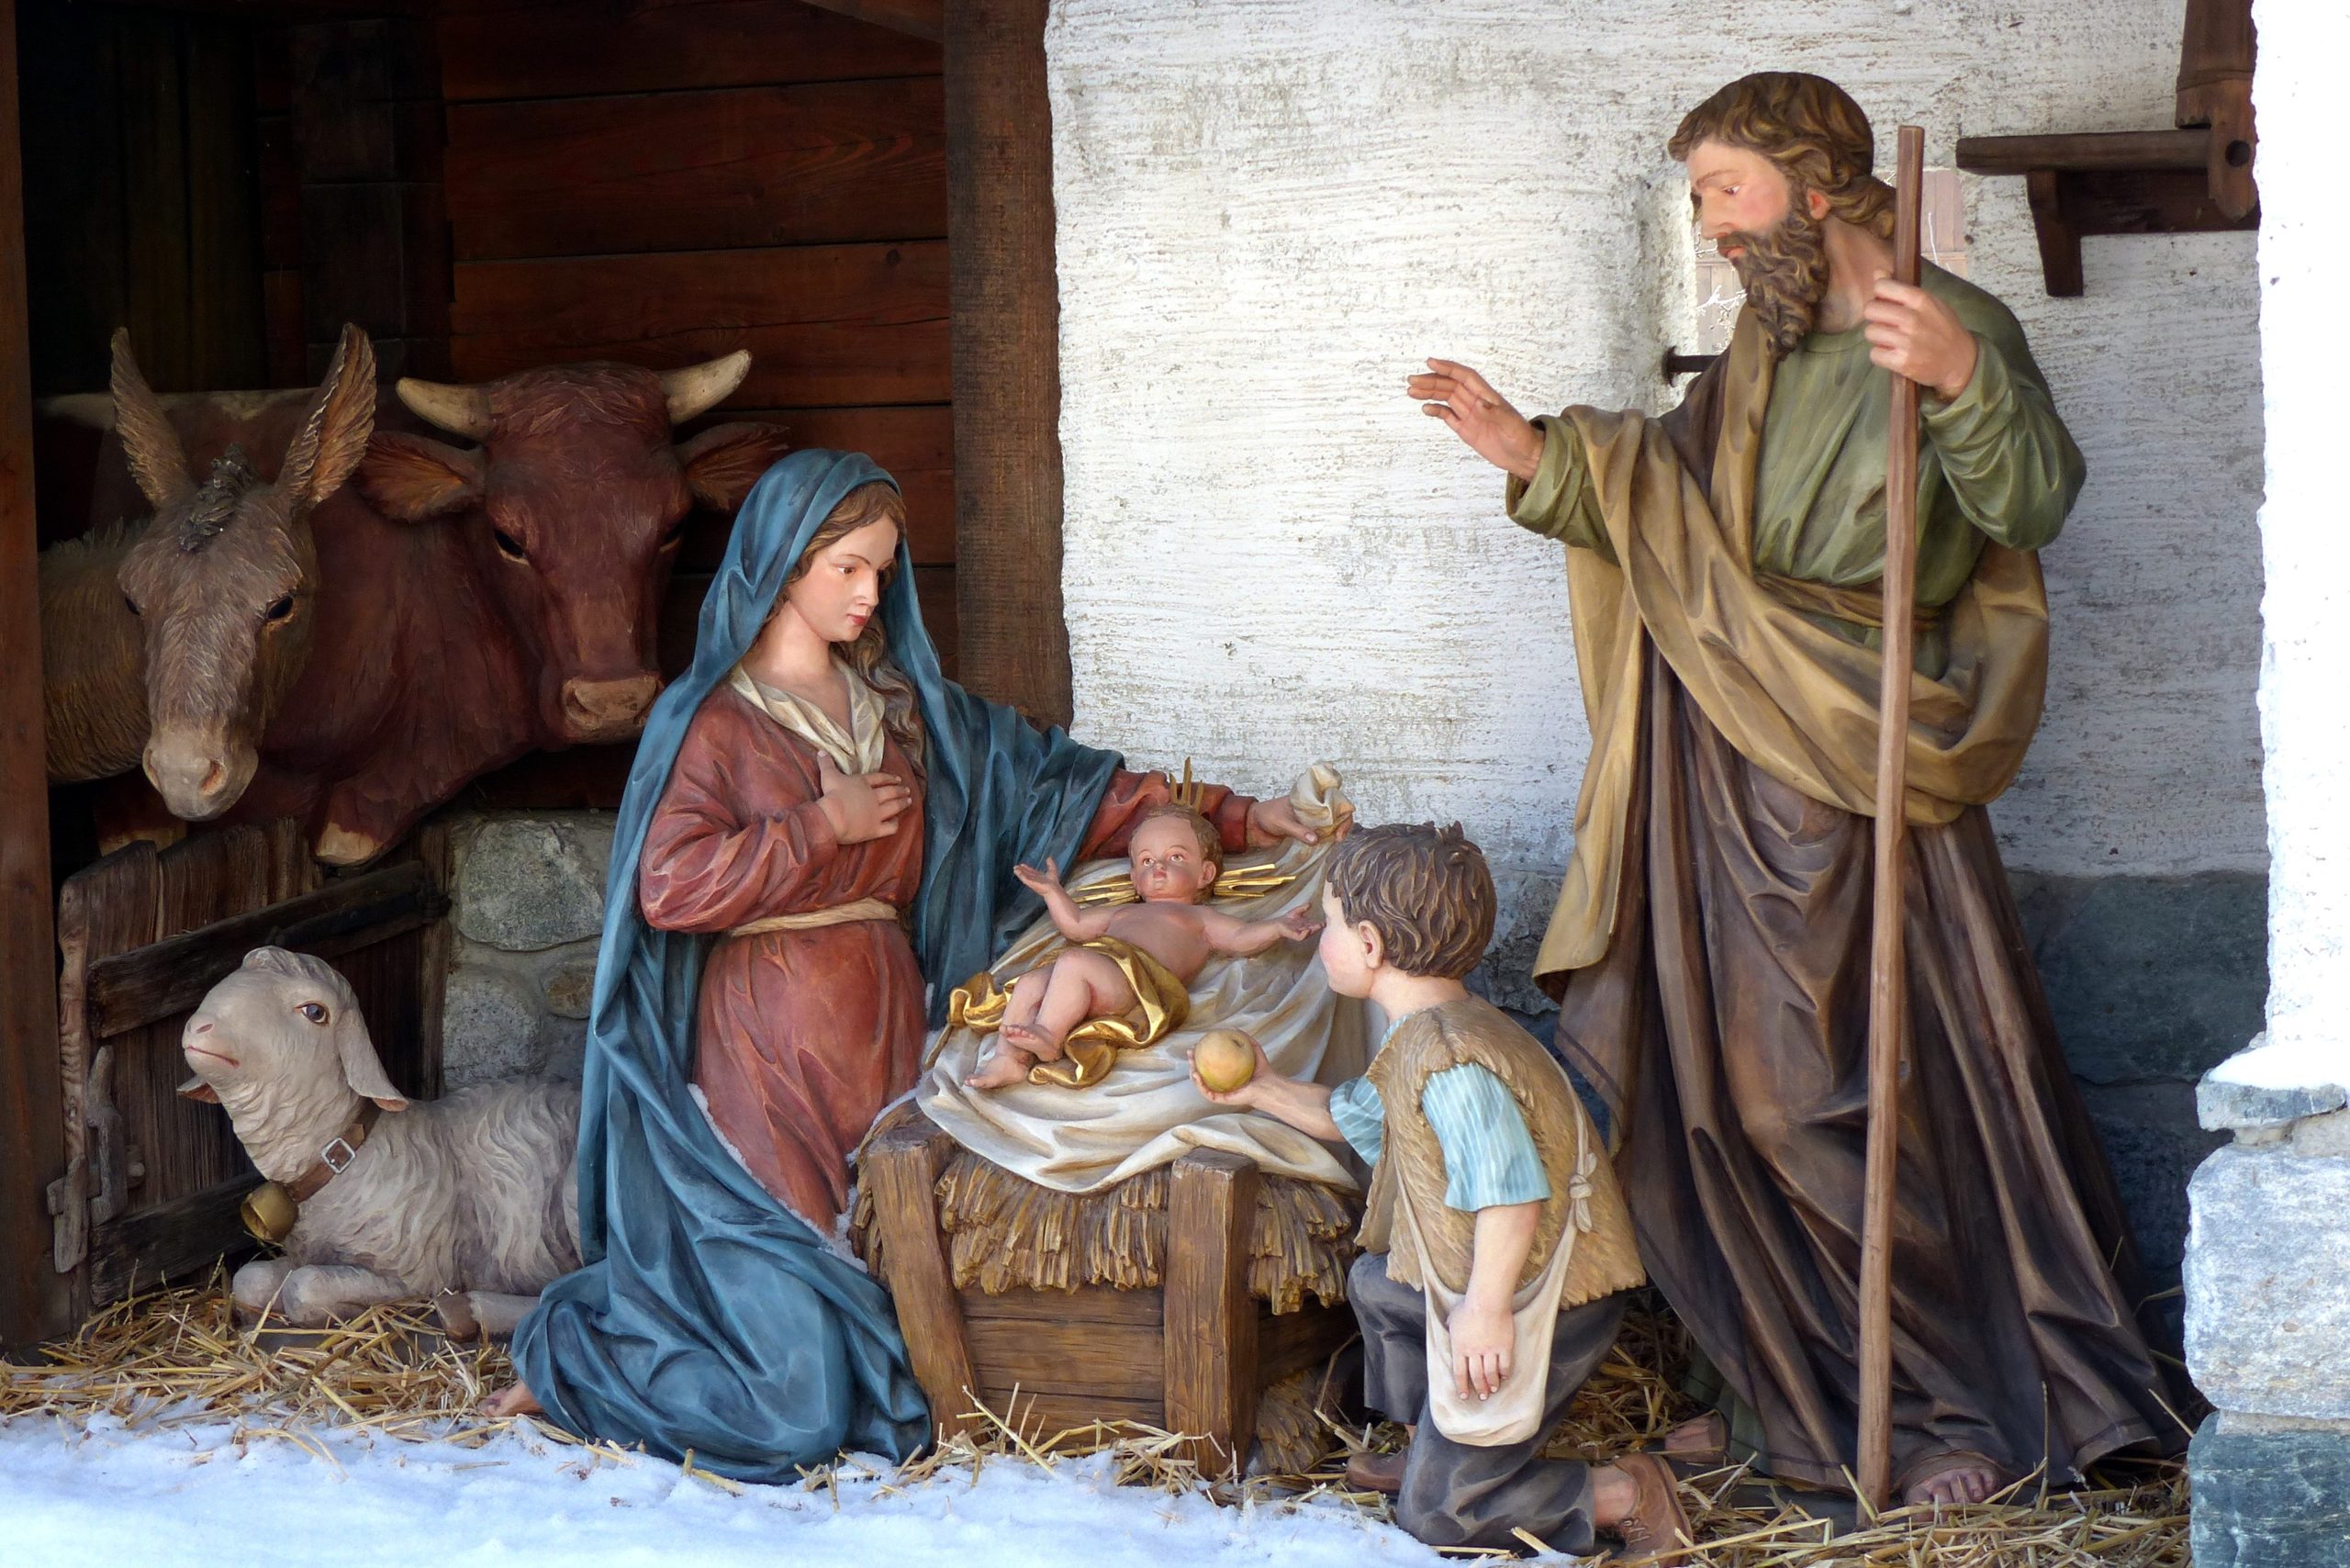 Christmas, advent, salvation, Jesus, true meaning of Christmas, Why did Jesus come